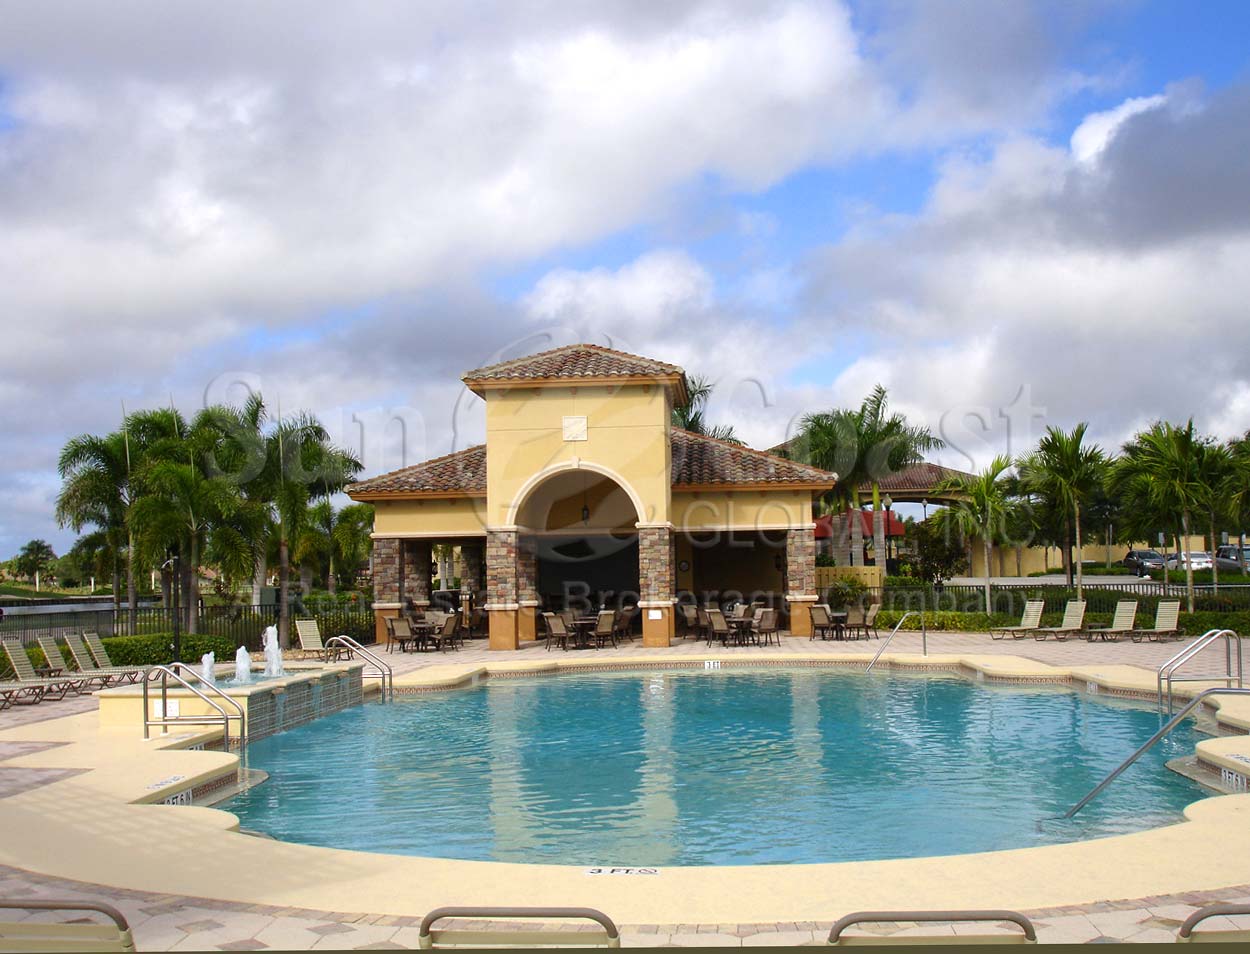 HERITAGE BAY Golf and Country Club fitness center, pool area and bar